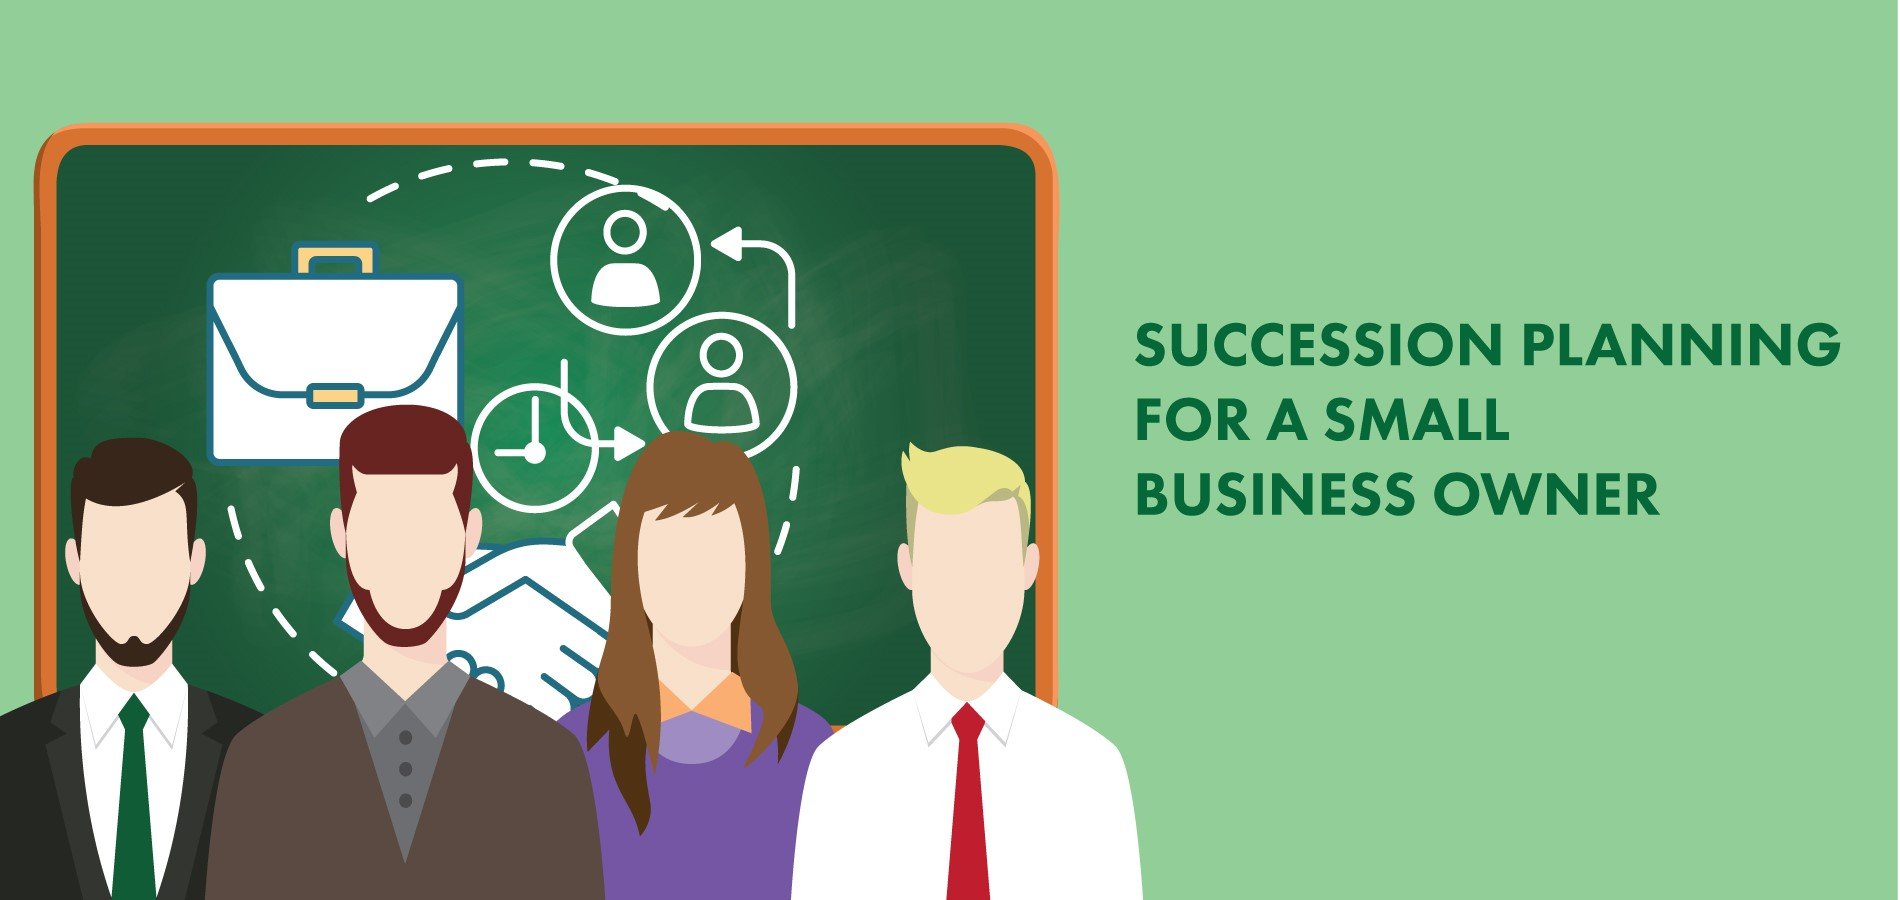 small business owner succession planning